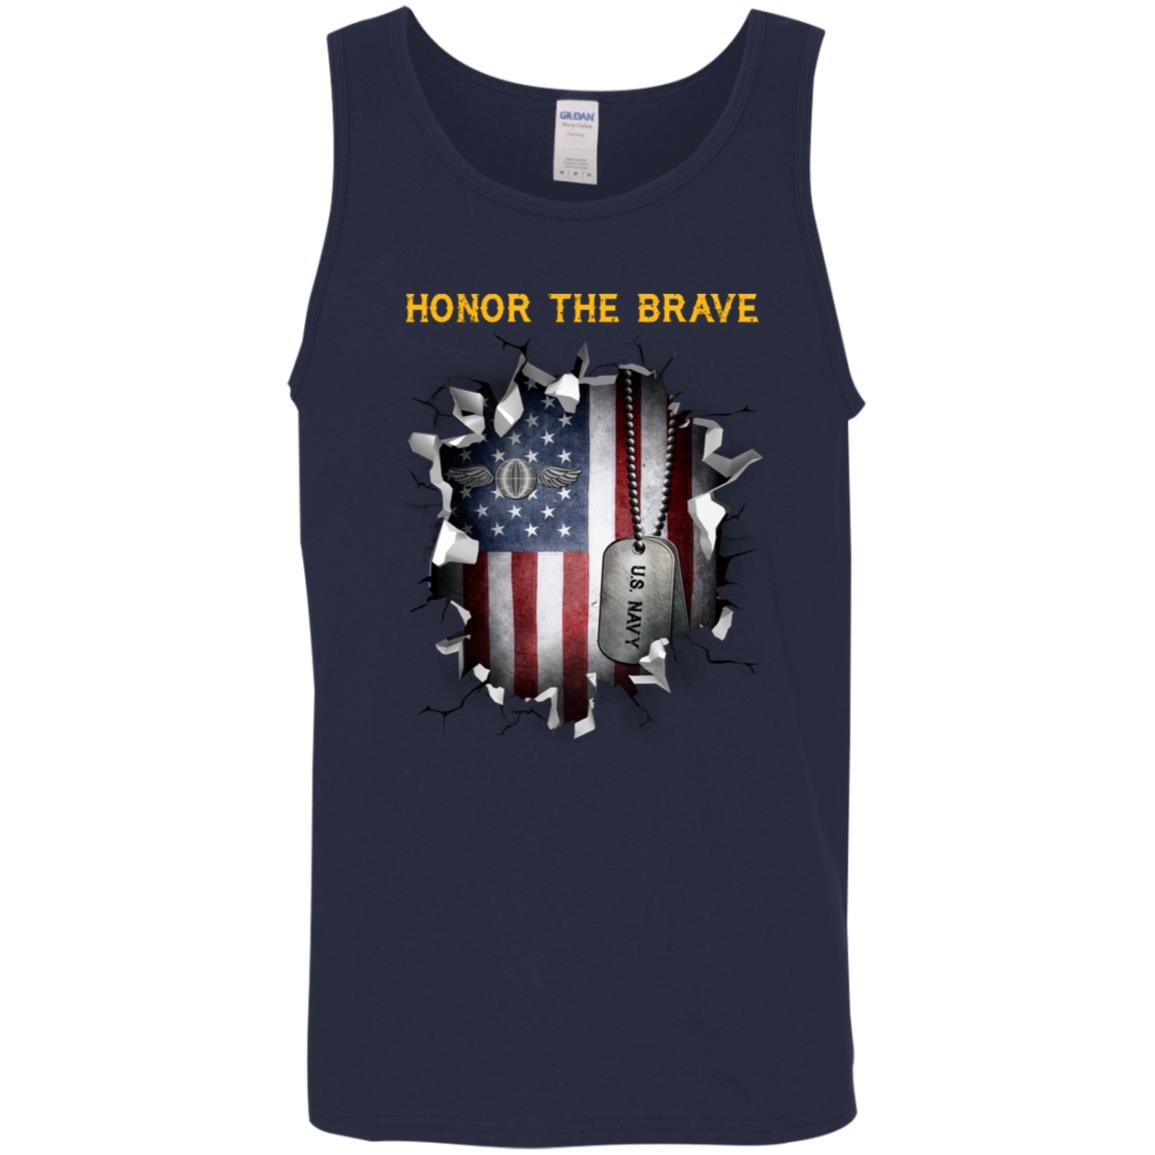 Navy Aviation Electronics Mate Navy AE - Honor The Brave Front Shirt